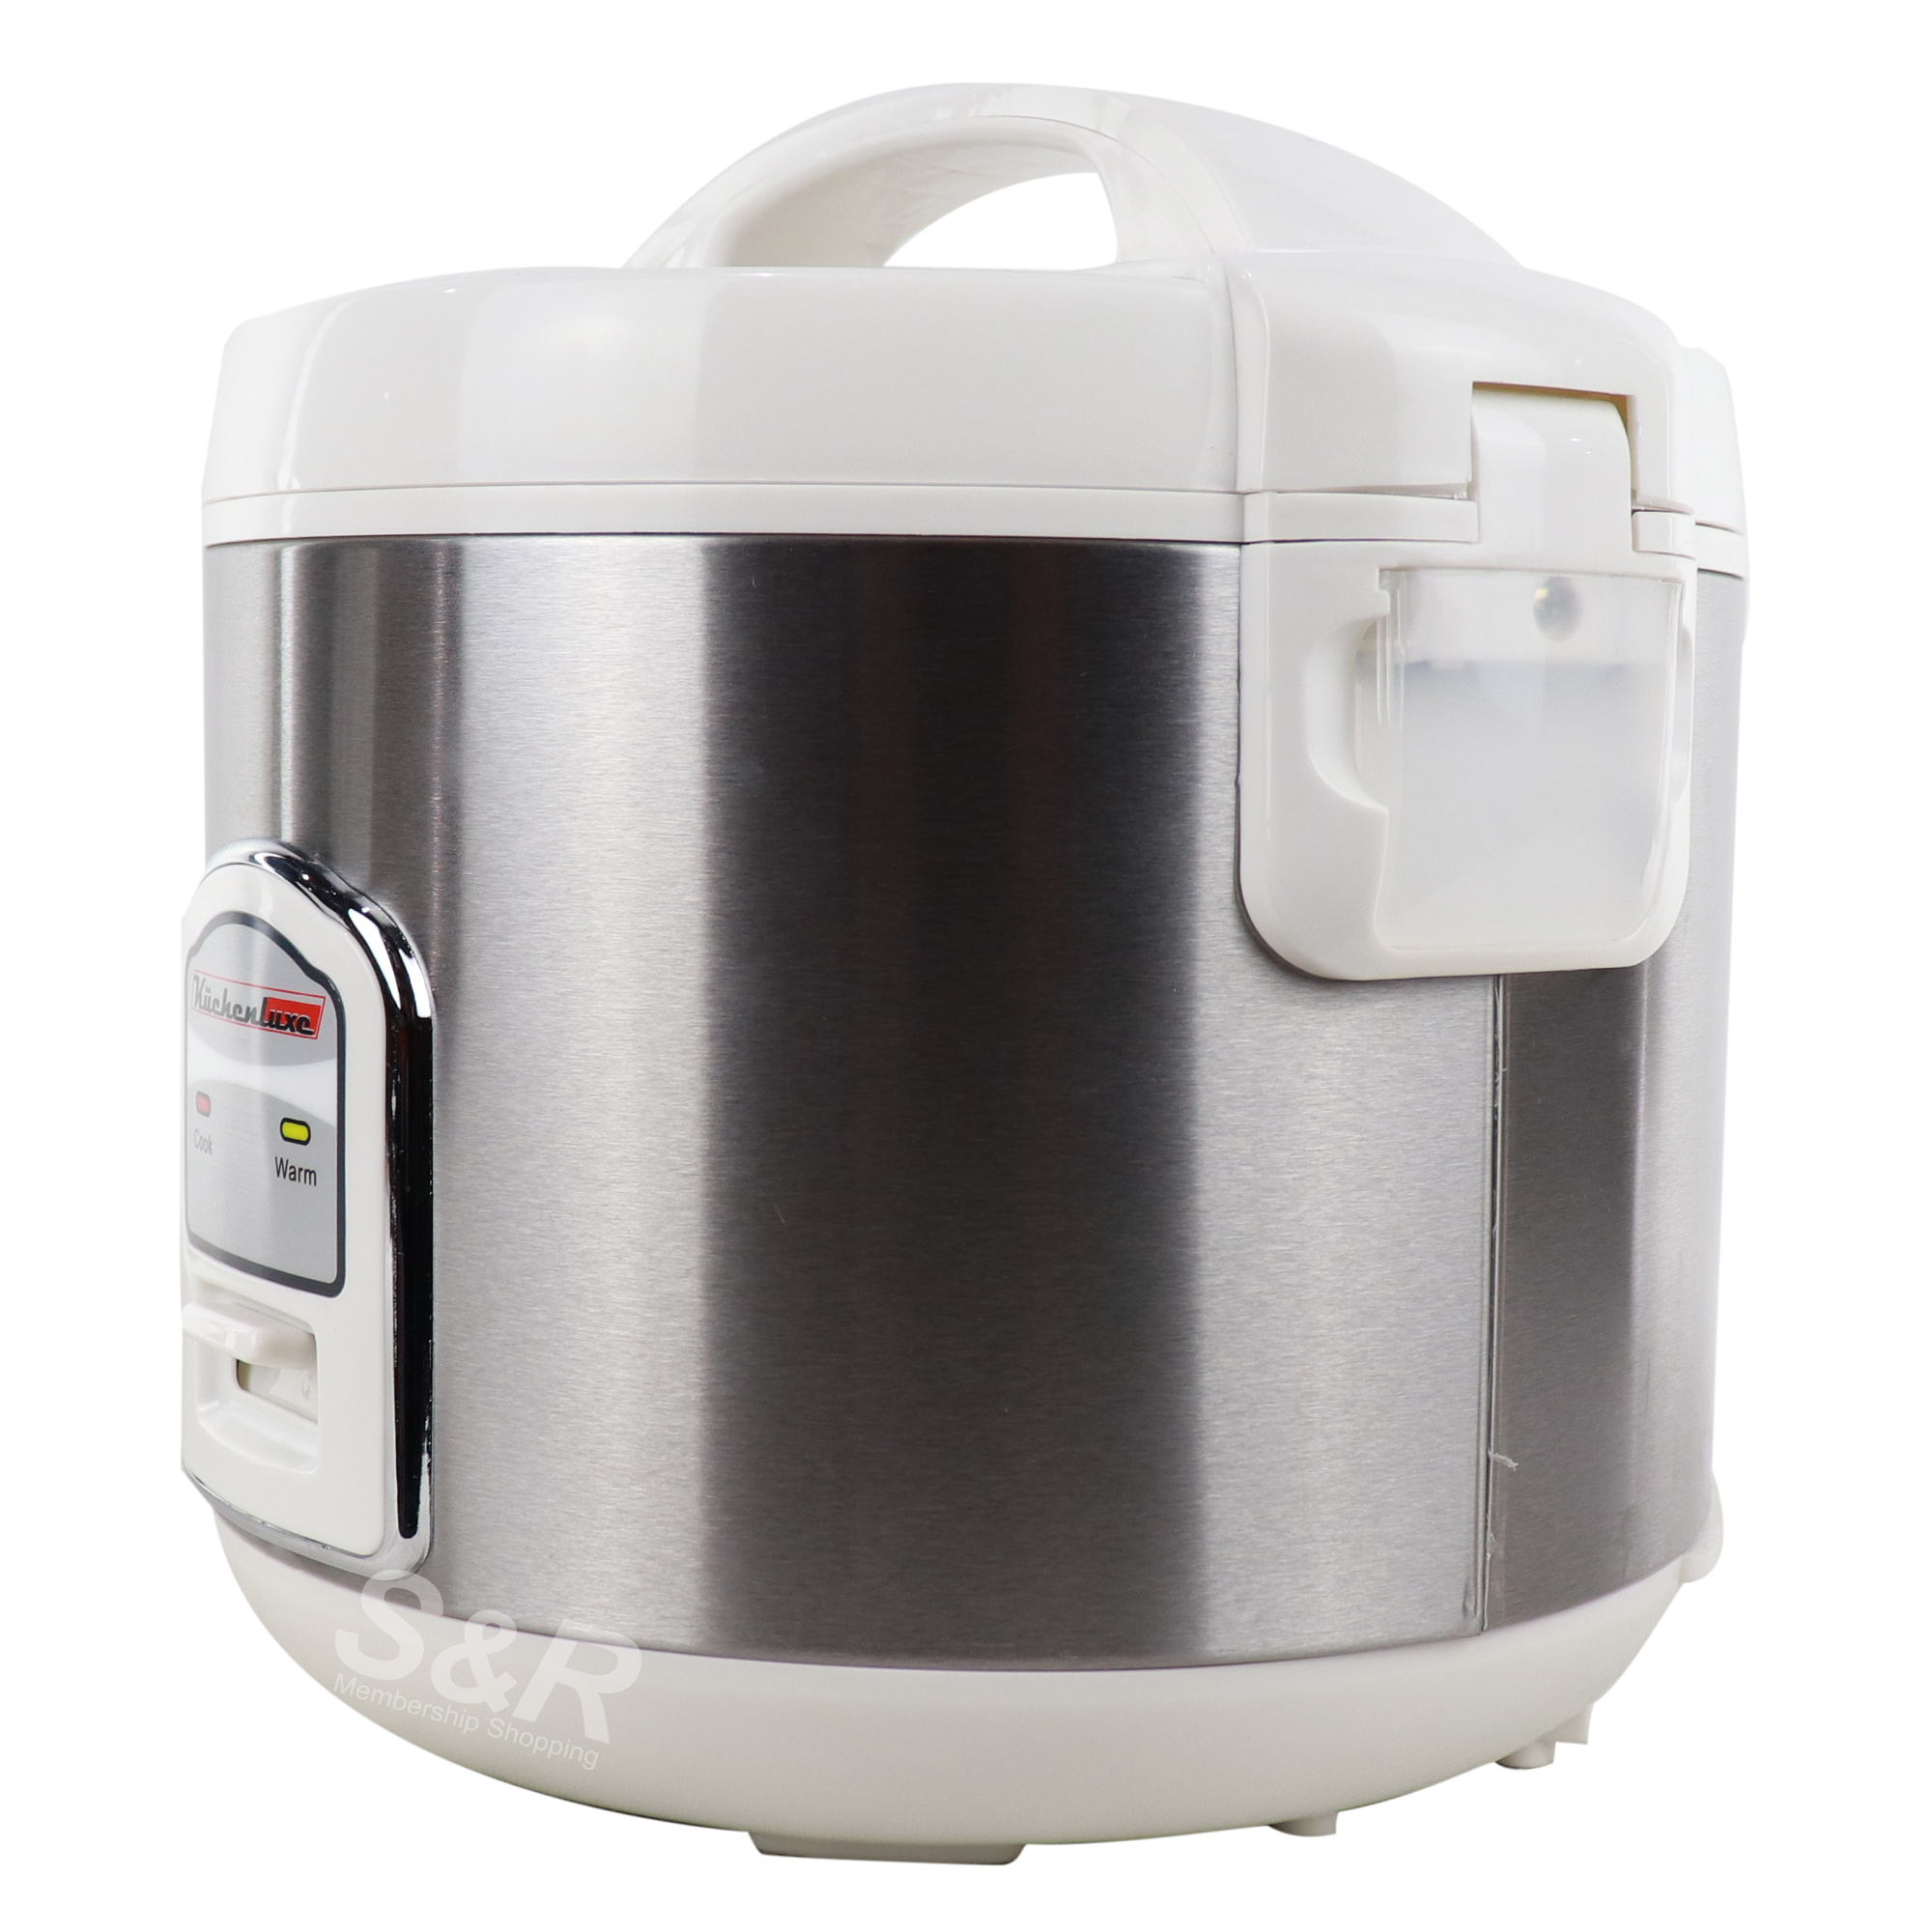 hotsun ELEGANT DELUXE ELECTRIC RICE COOKER Electric Rice Cooker Price in  India - Buy hotsun ELEGANT DELUXE ELECTRIC RICE COOKER Electric Rice Cooker  Online at